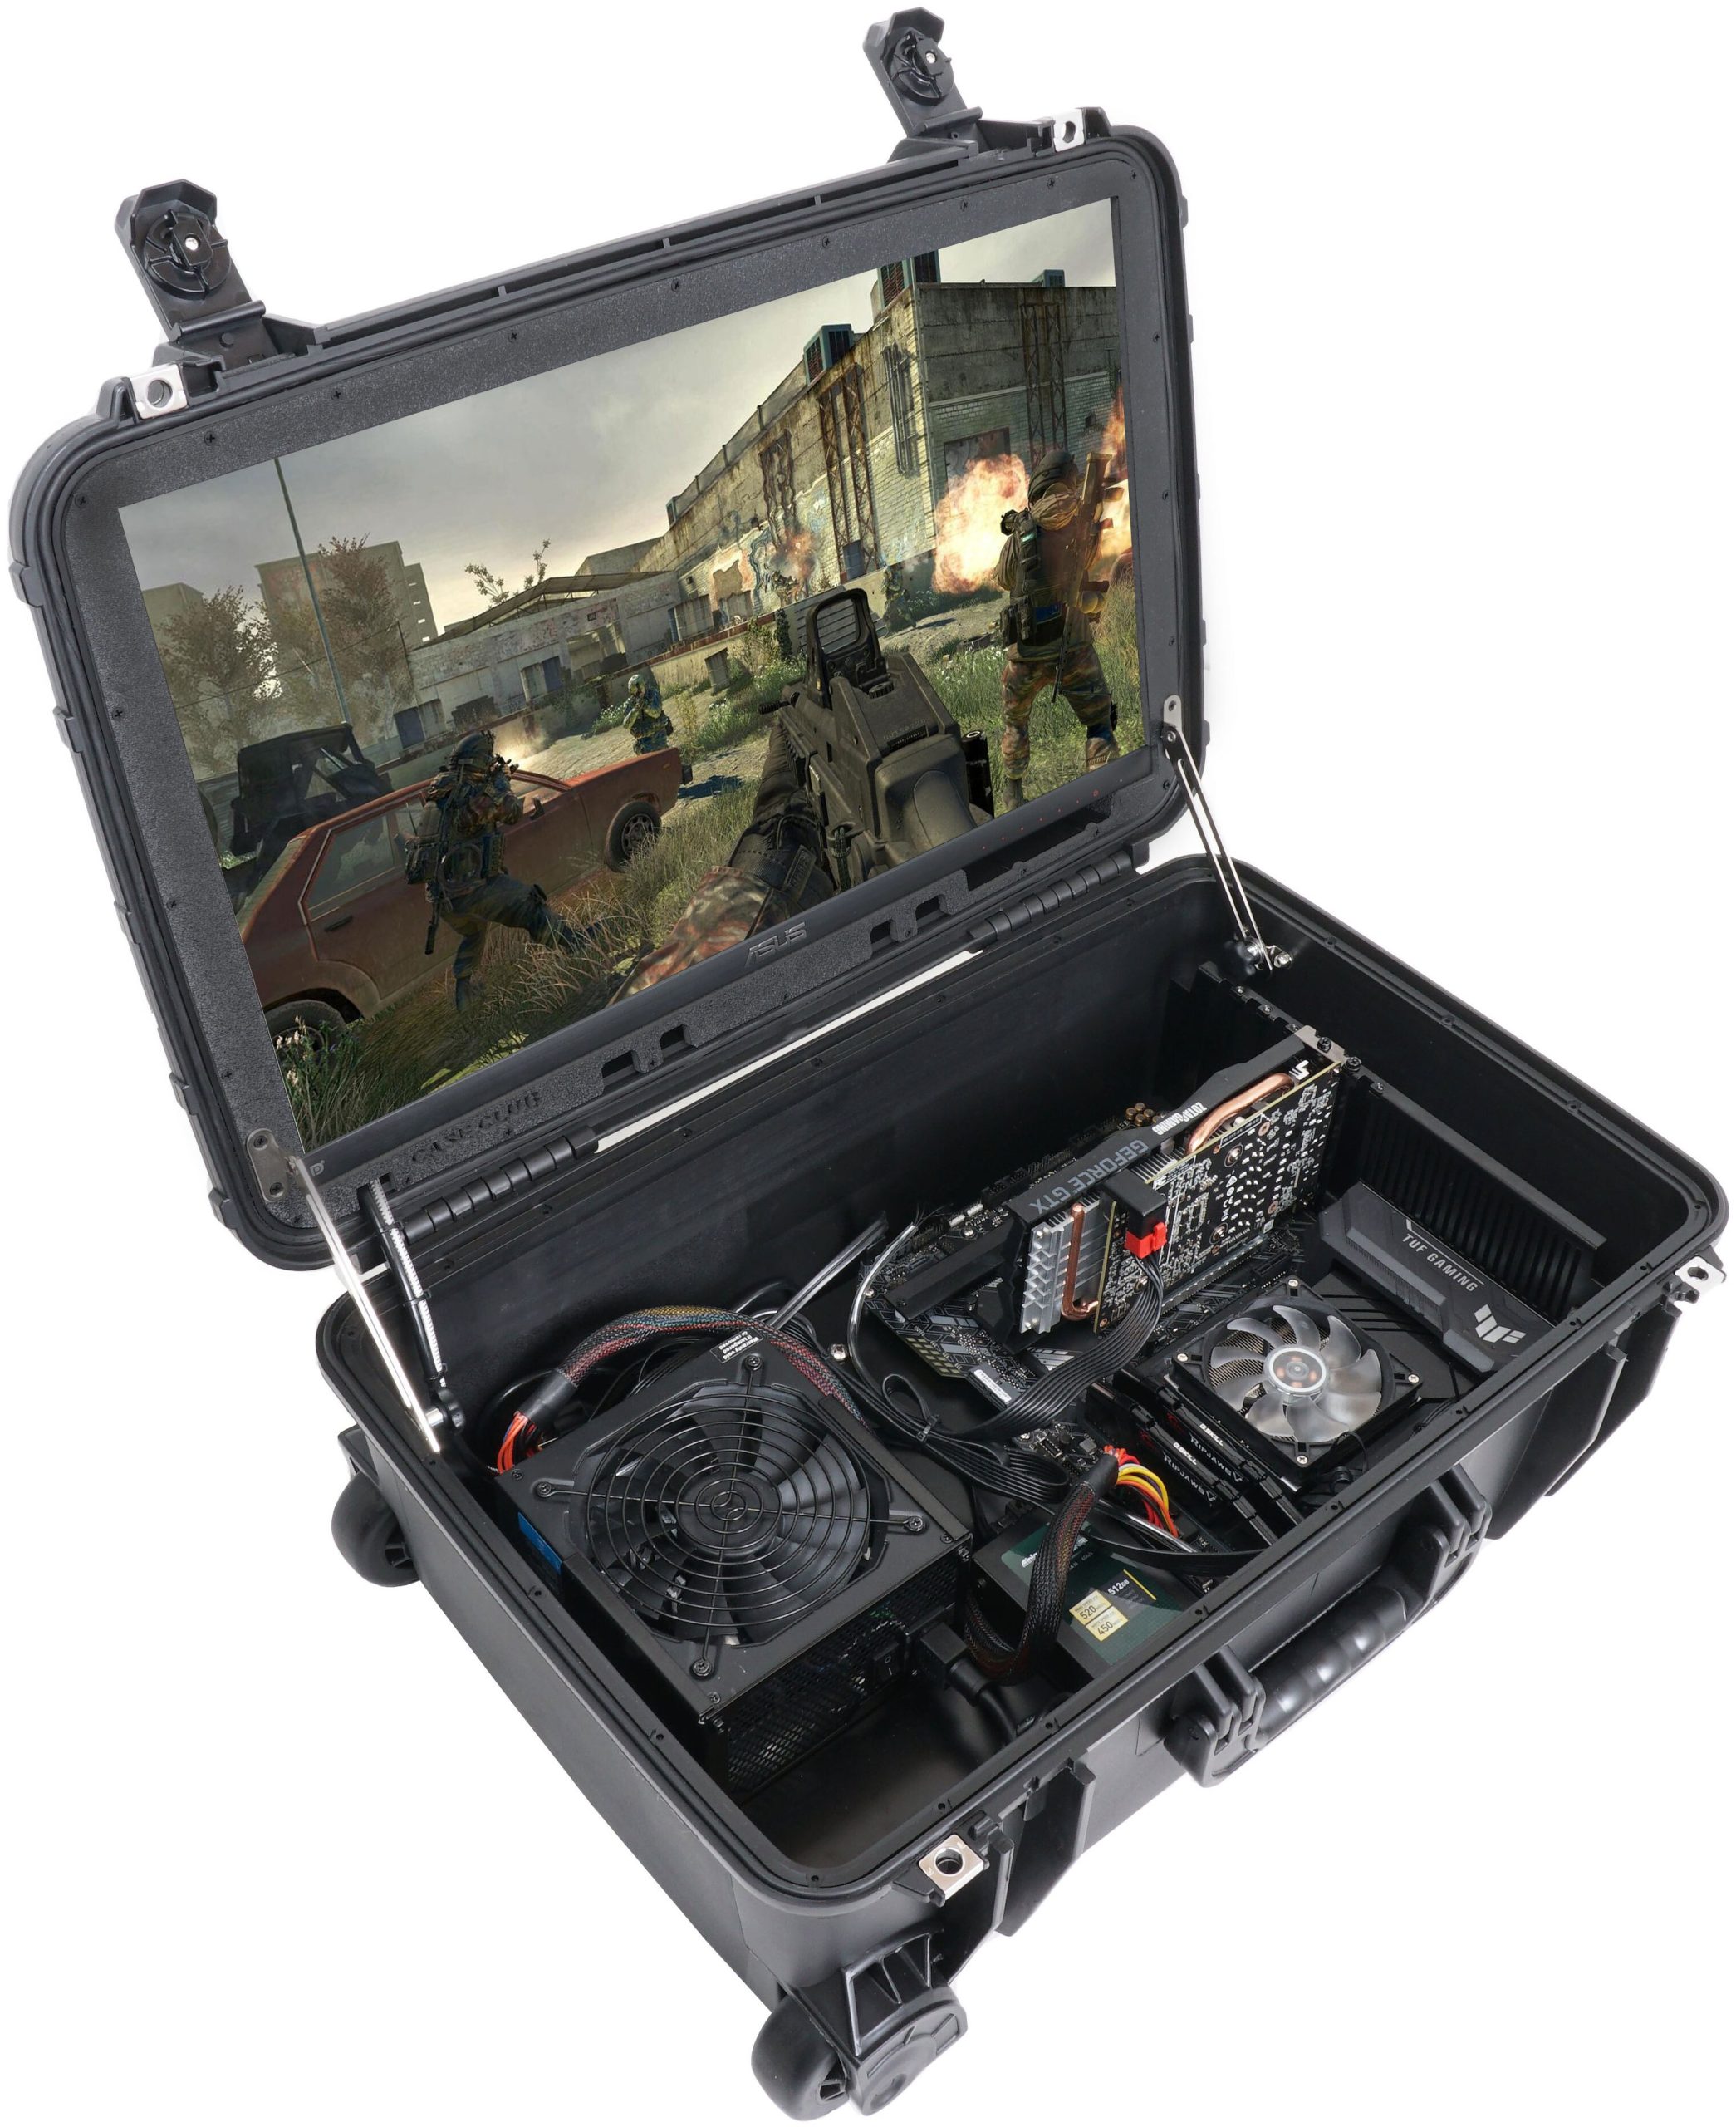 Case Club Waterproof PlayStation 4 Portable Gaming Case w/ Built in Monitor